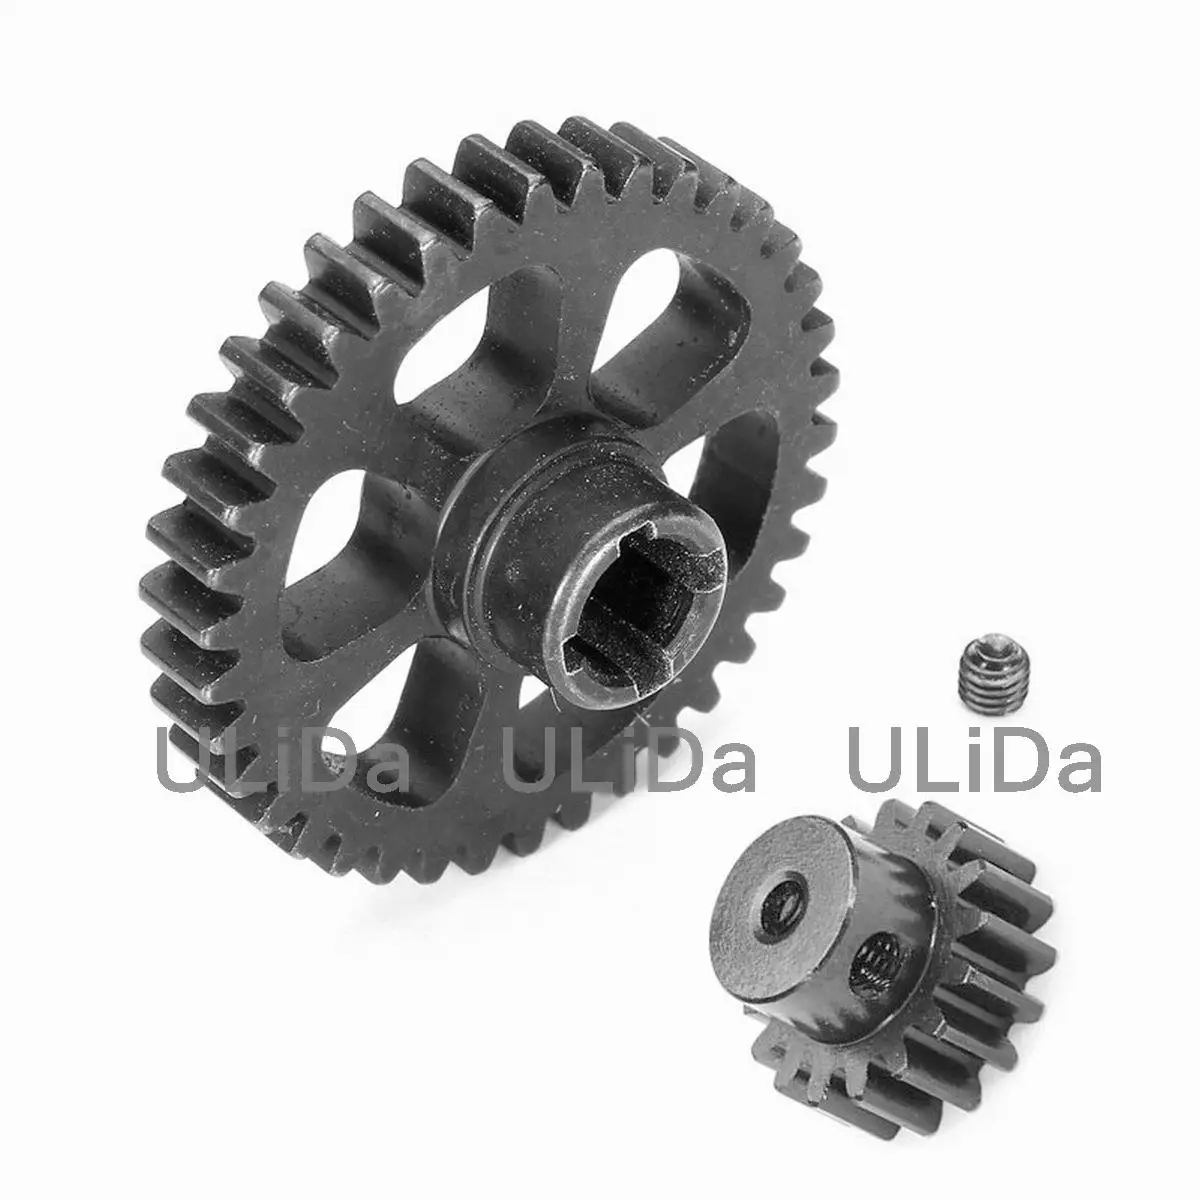 

Metal Diff Main Gear 38T + Motor Pinion Gear 17T For 1/18 WLtoys A949 A959 A969 A979 K929 Short Course Truck Upgrade Parts